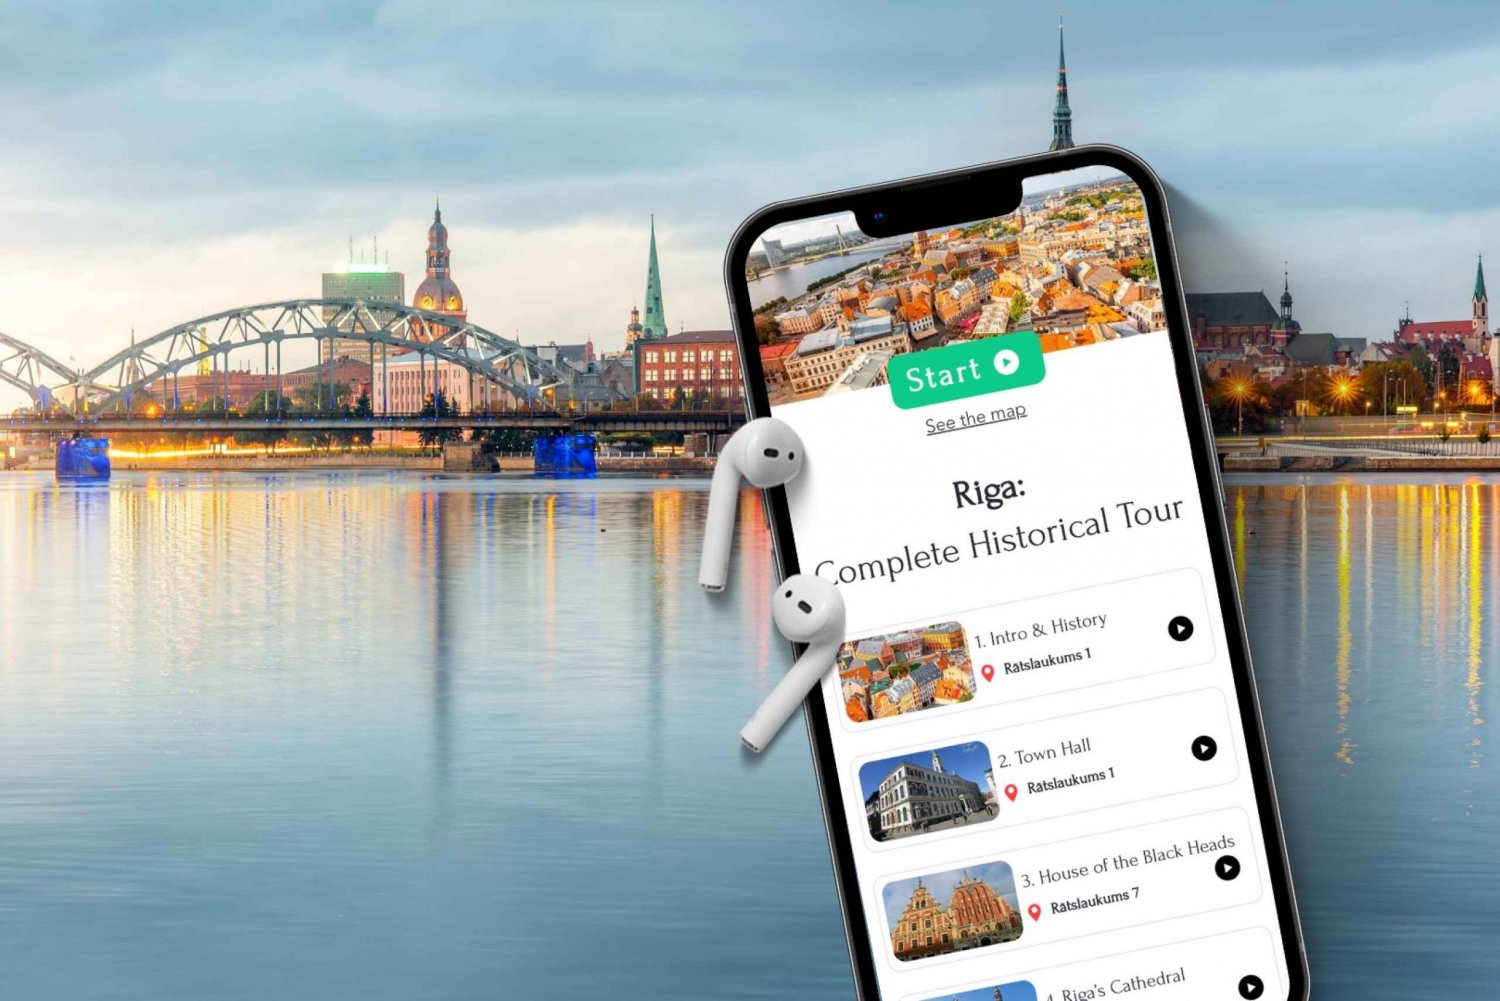 Riga: Complete English Self-guided Audio Tour on your Phone